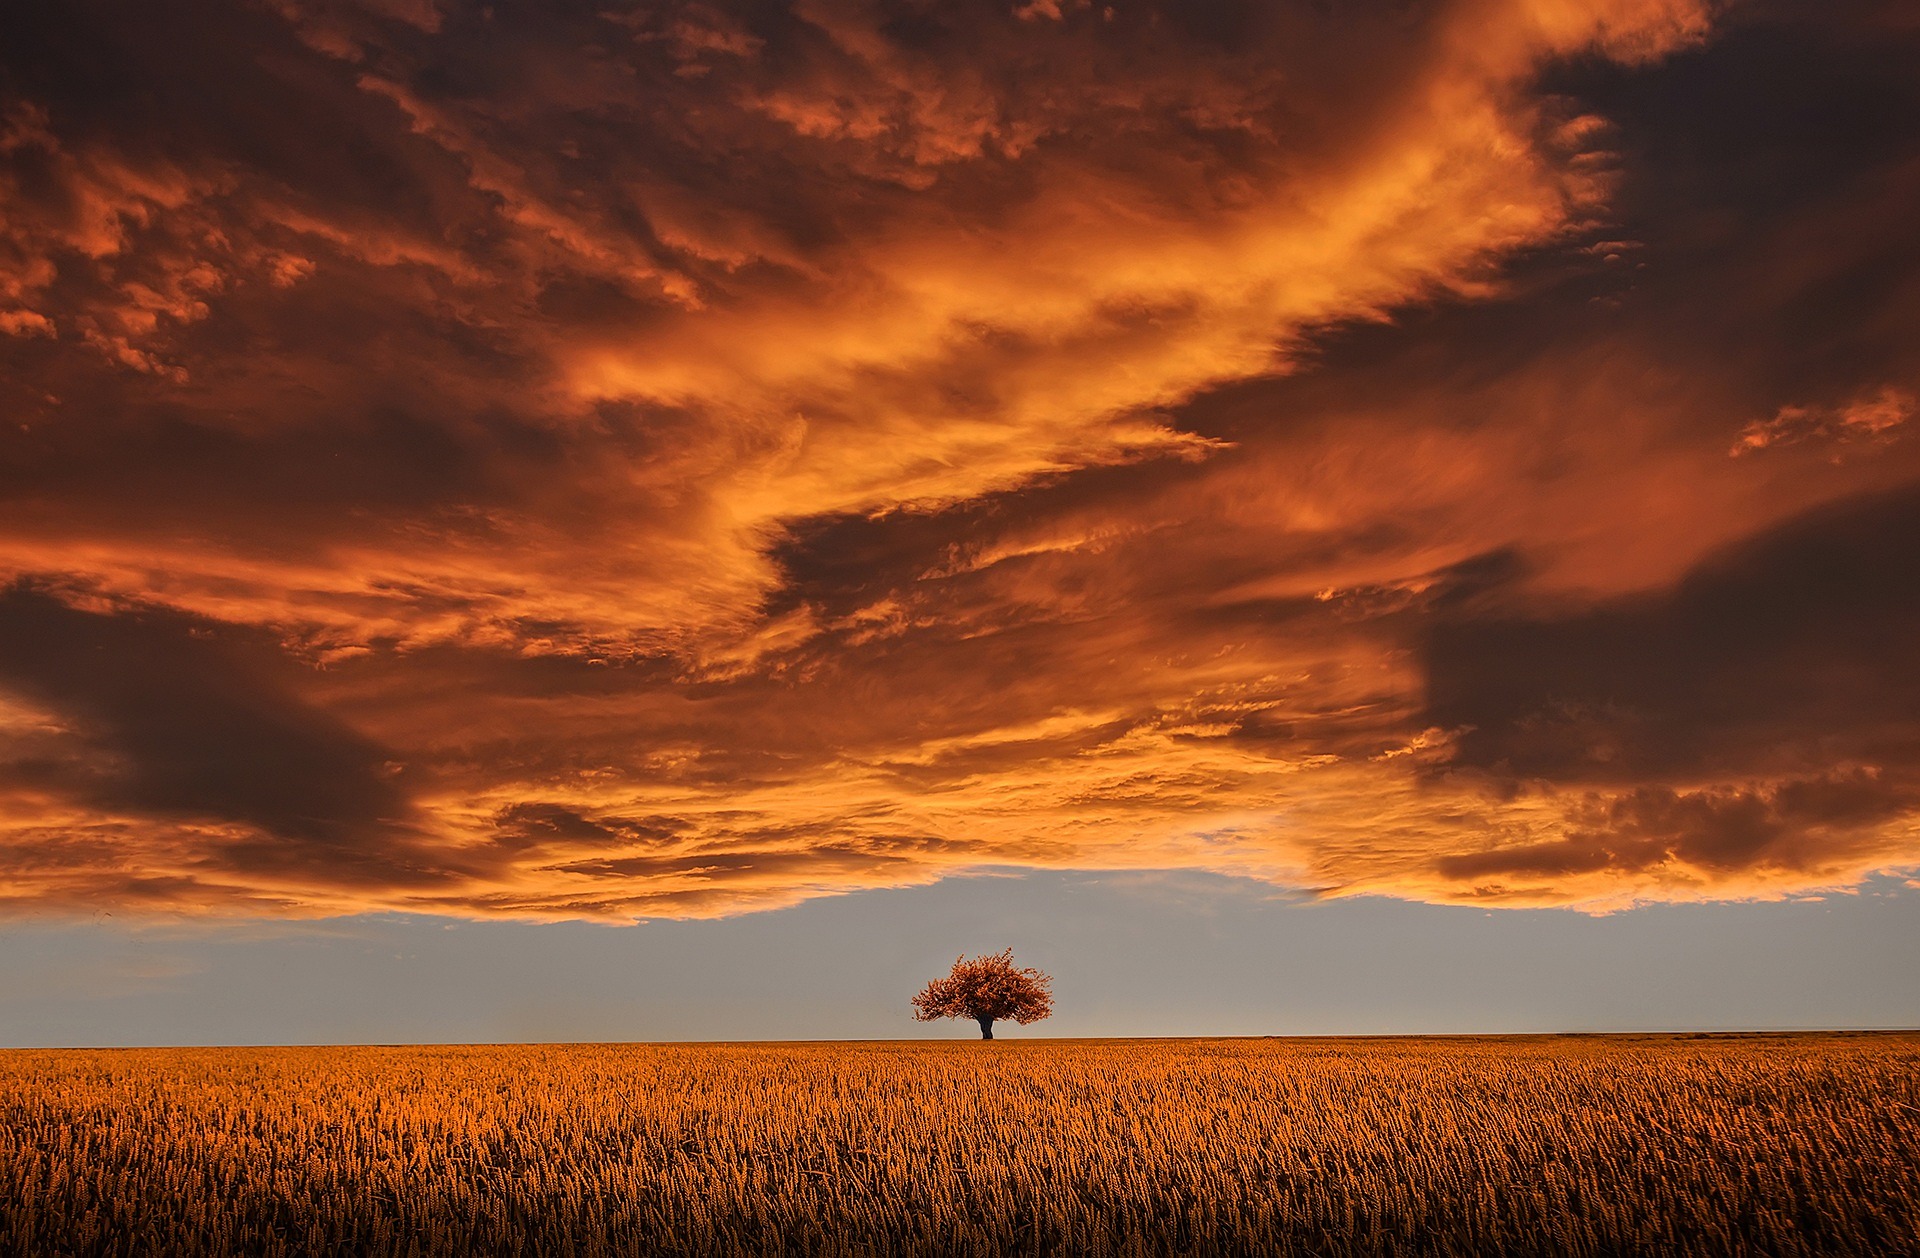 Tree in field holding off stormy orange clouds